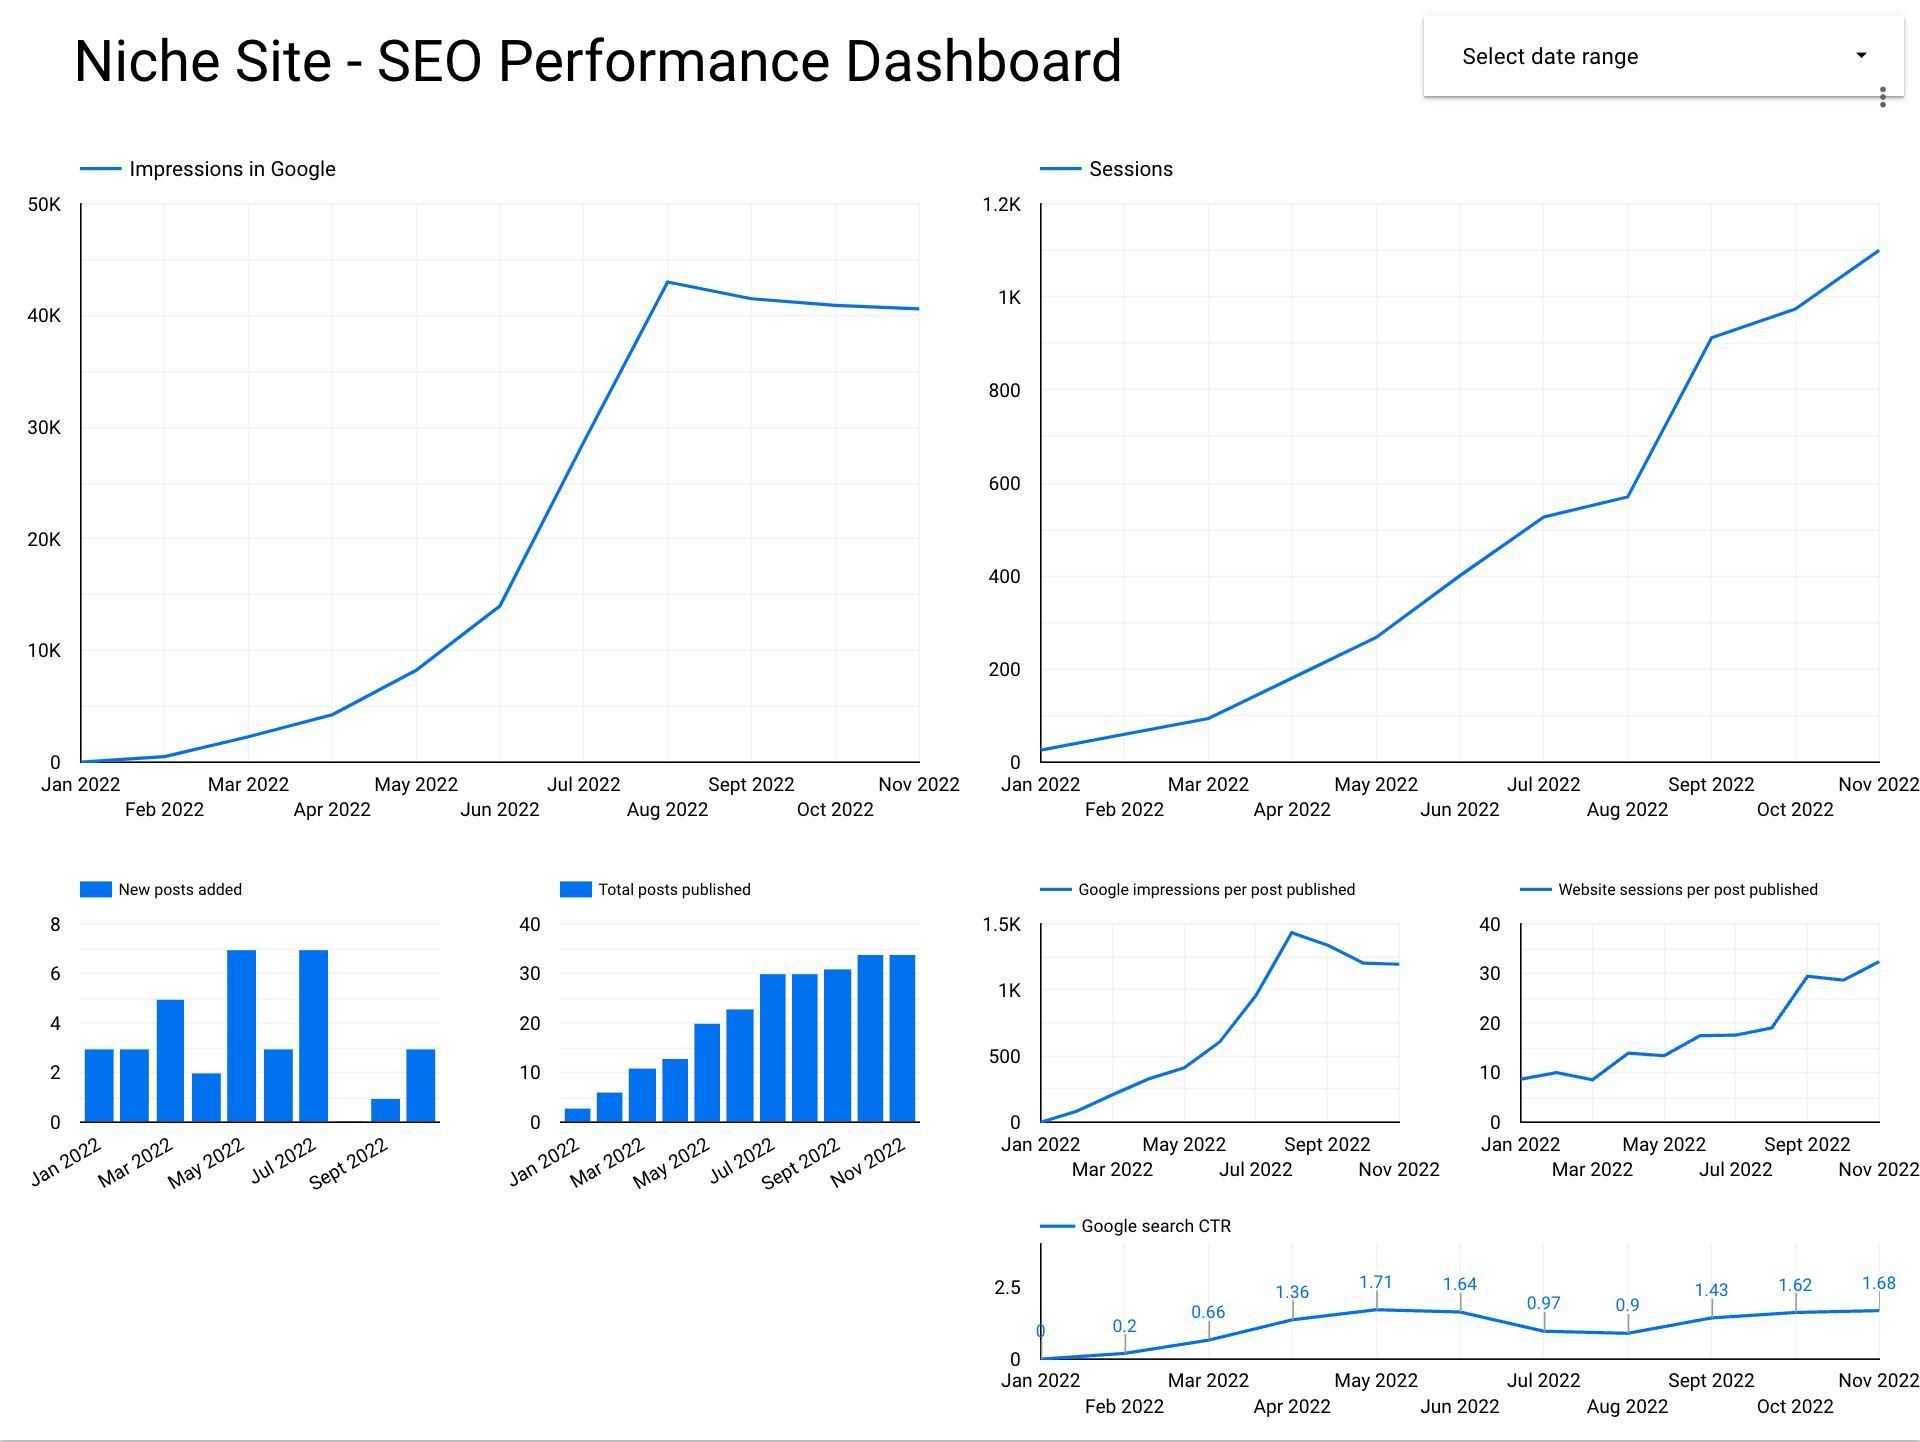 Growth results for niche seo site in october and november 2022